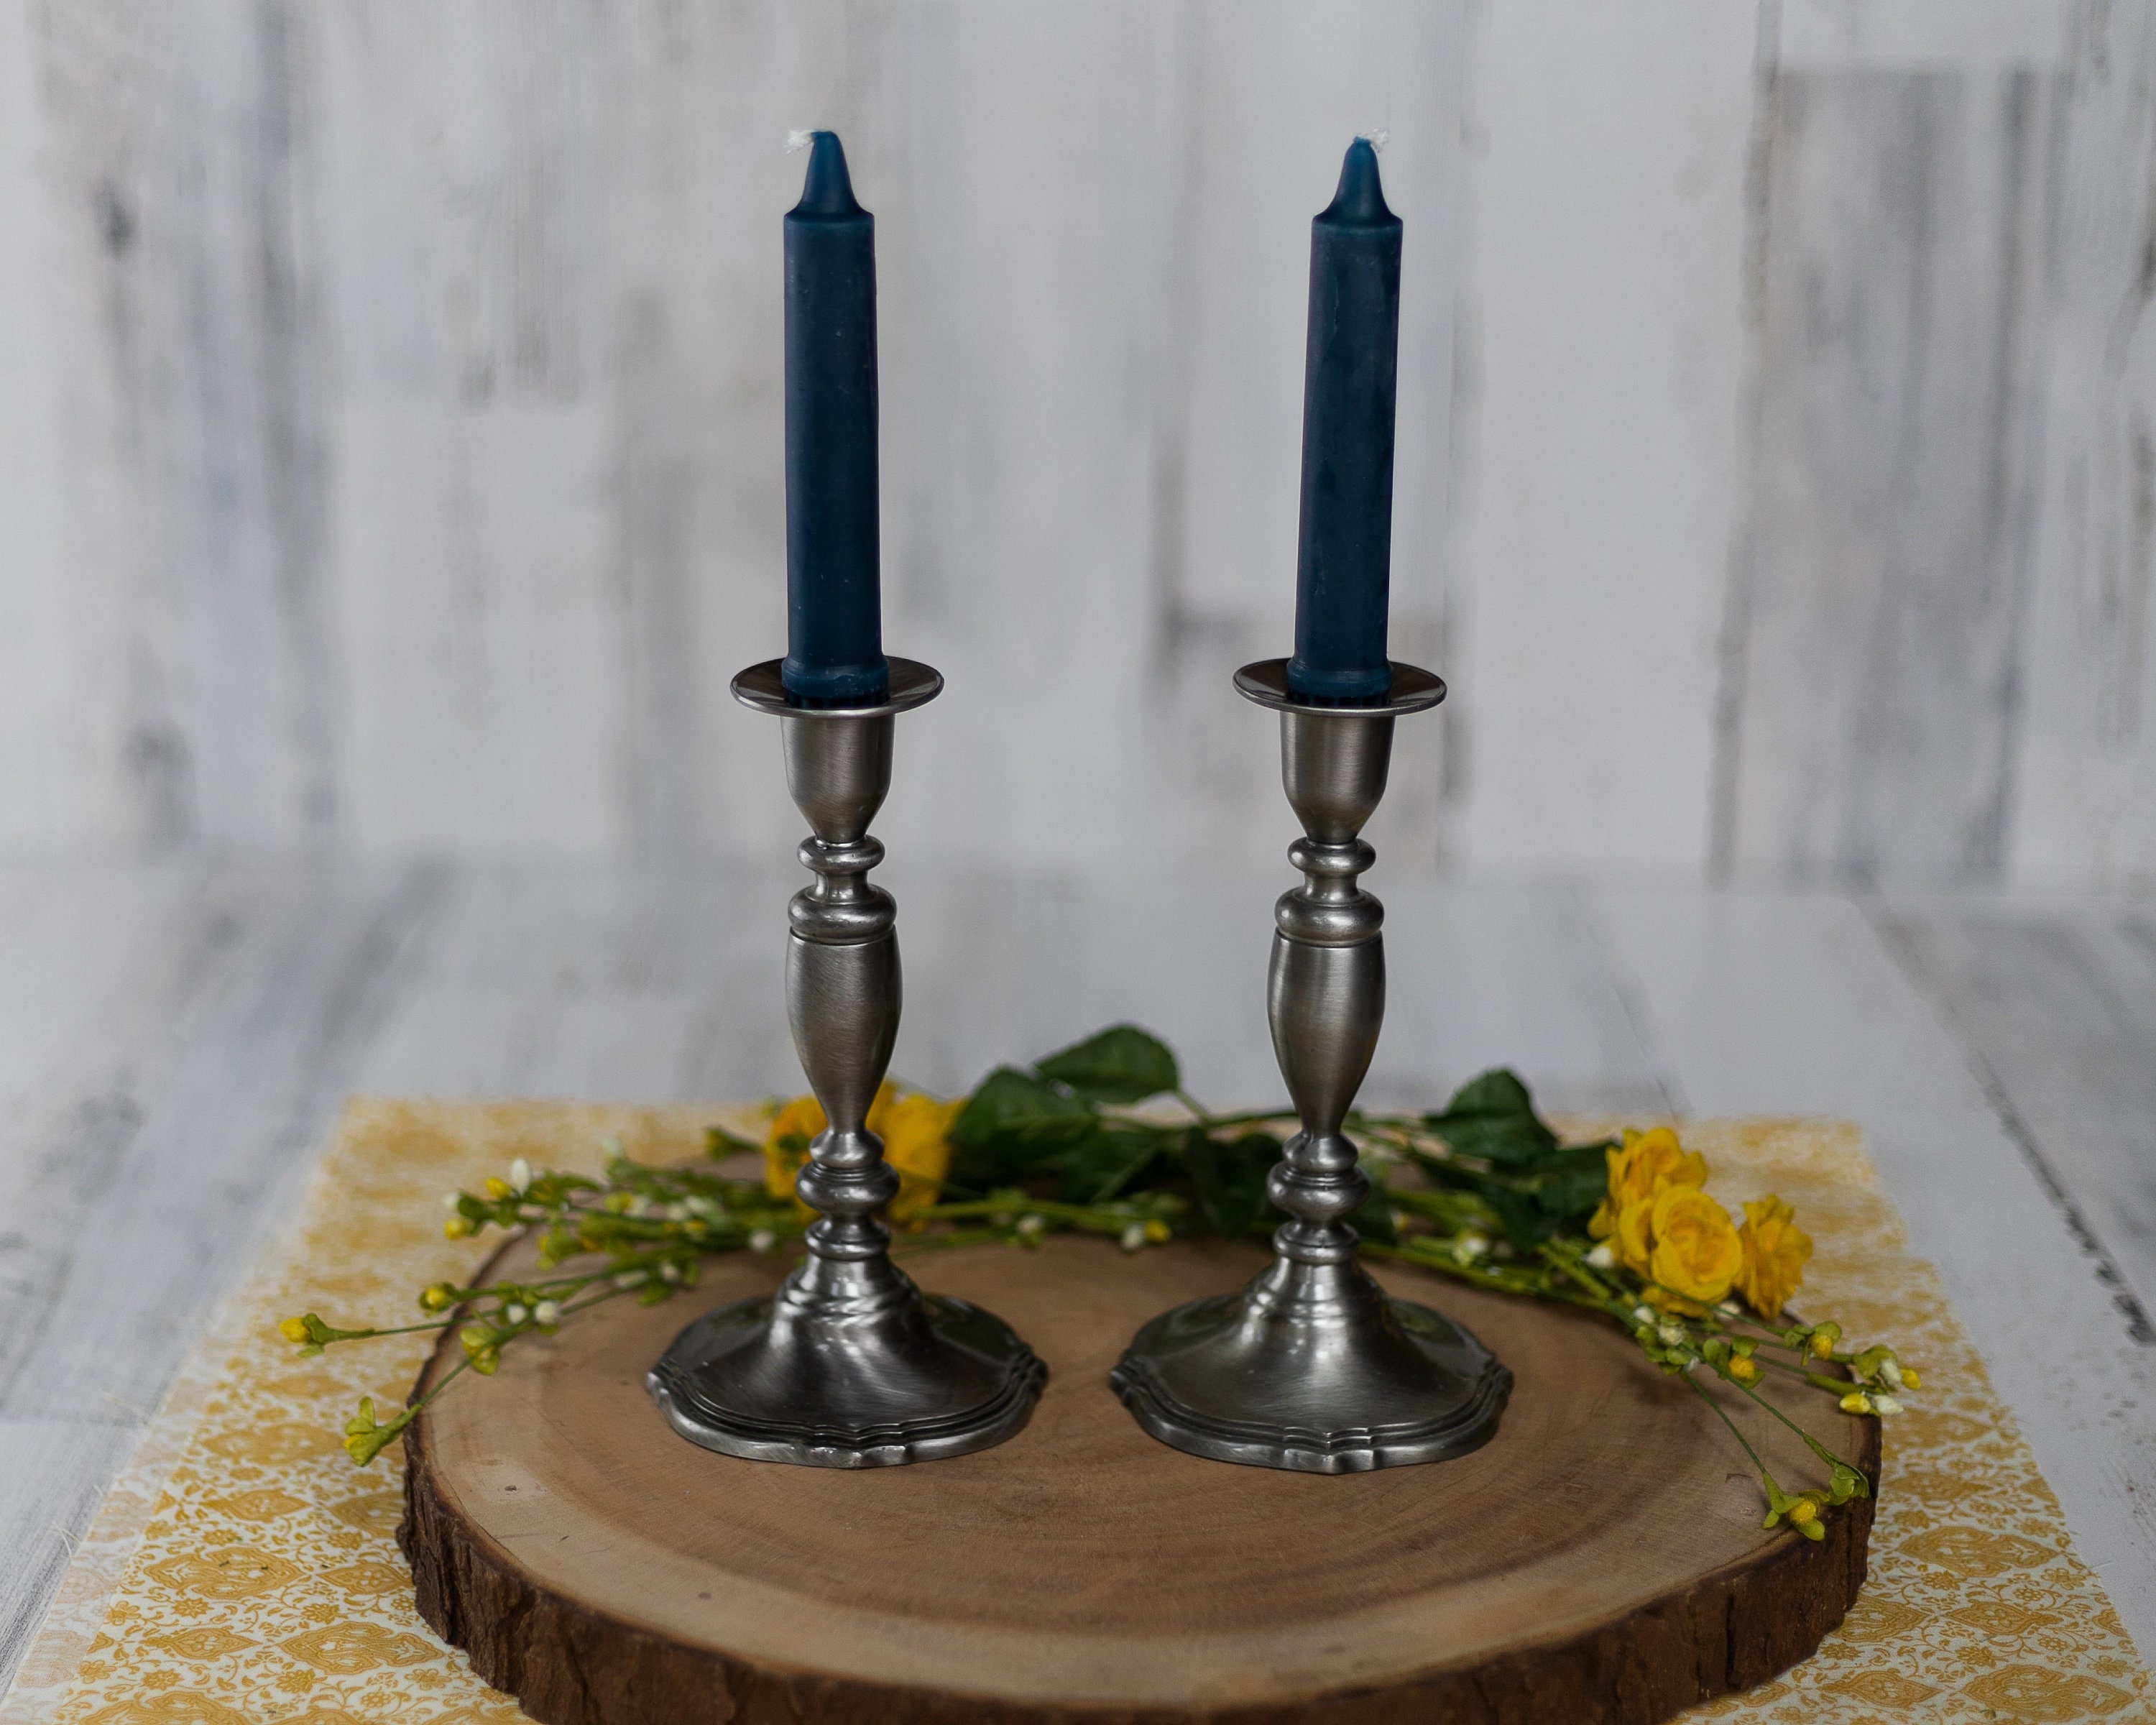 MATCH Drip Candles, Handmade from Beeswax, 6 Sizes on Food52